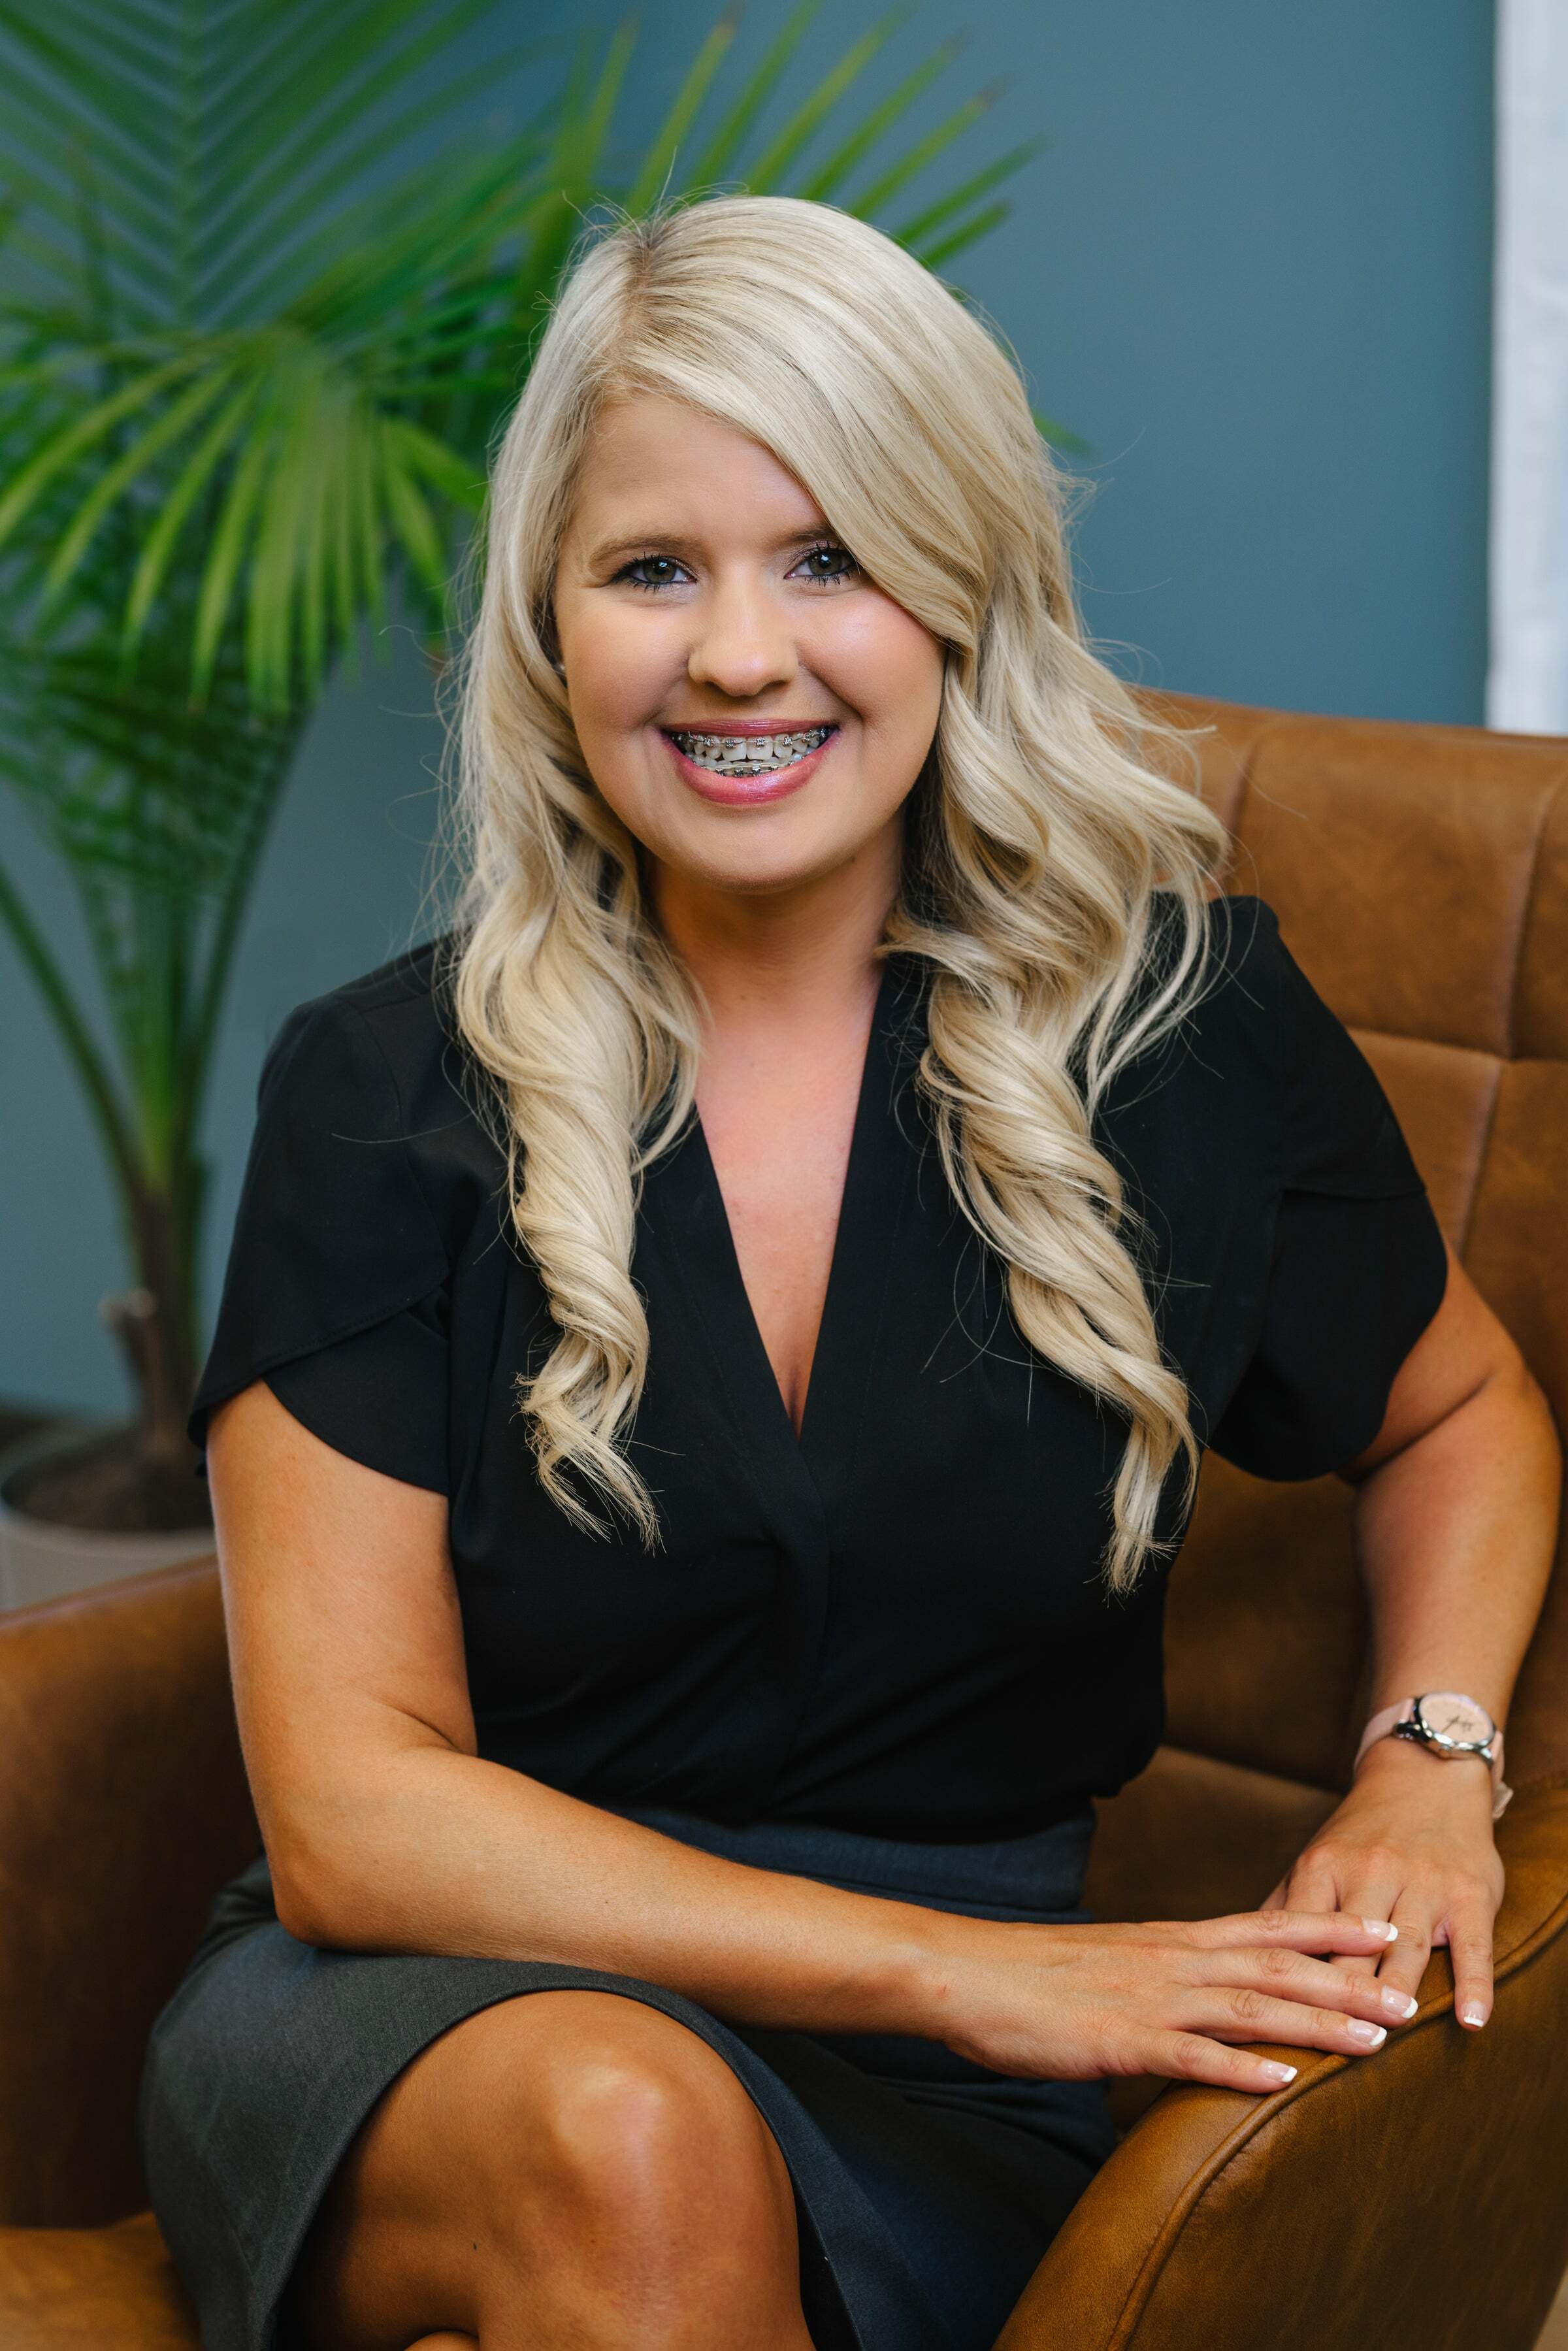 Shelly White, Real Estate Salesperson in Pell City, ERA King Real Estate Company, Inc.